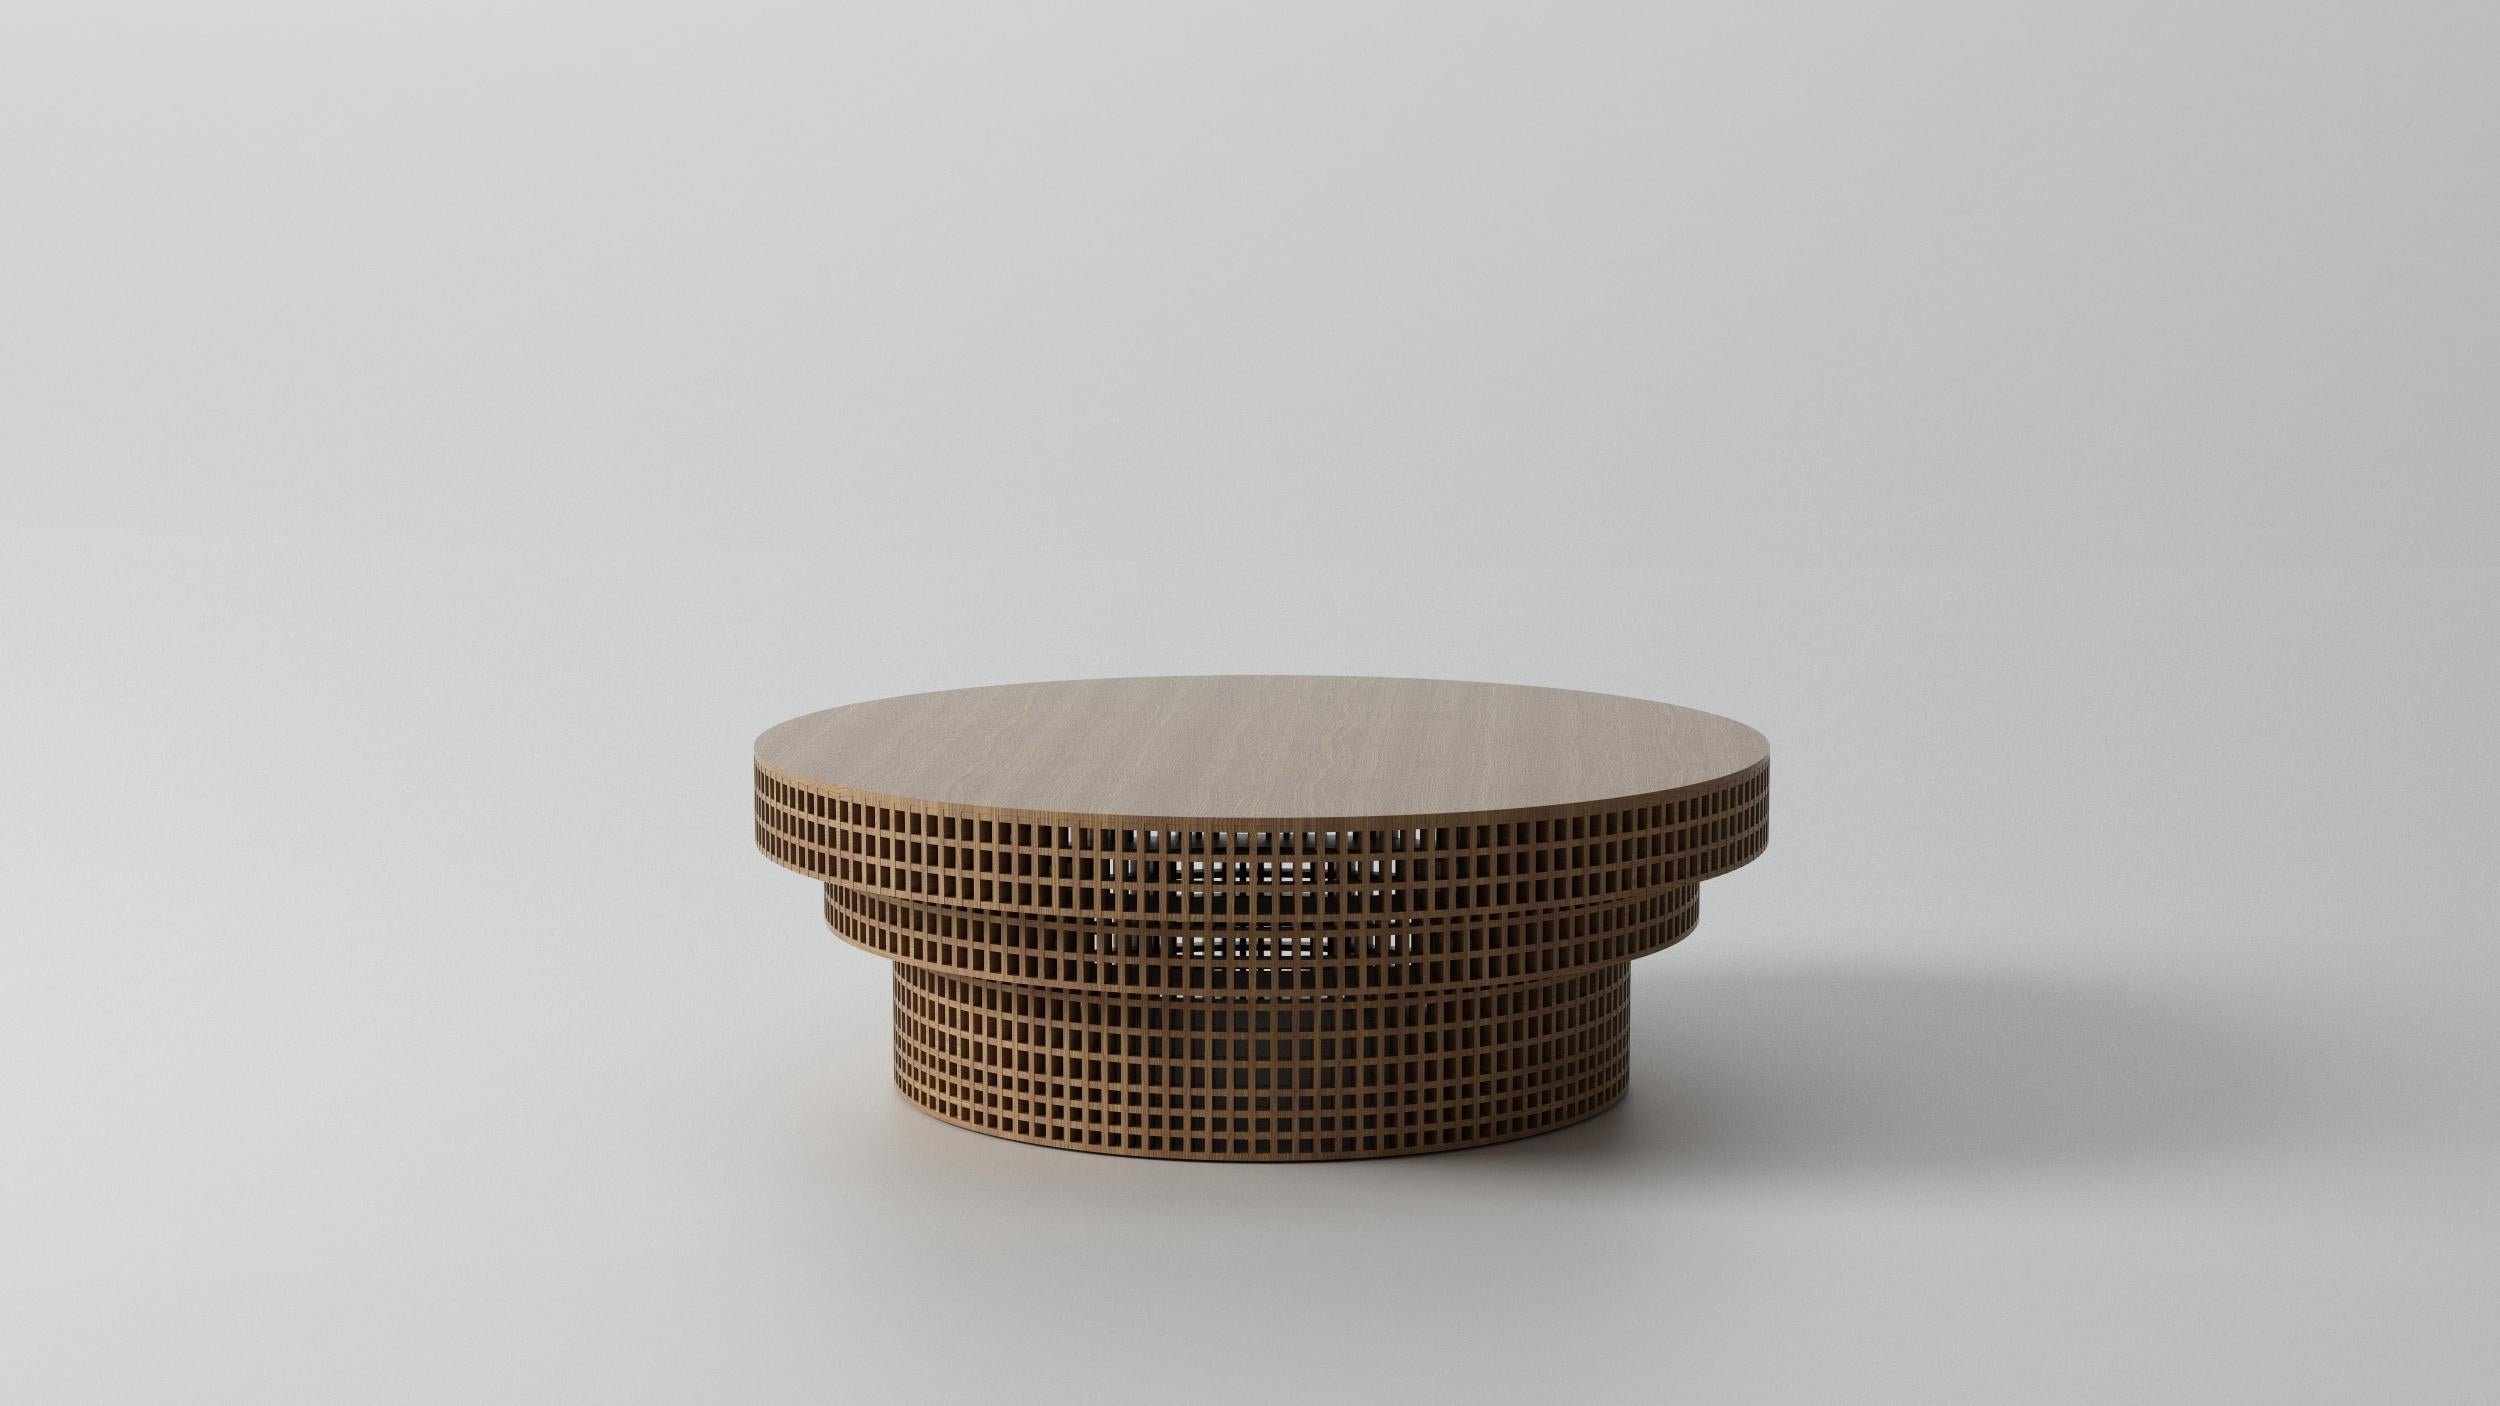 Carabottino coffee table by Cara Davide
Carabottino Collection
Medulum
Dimensions: Ø 150 x H 51 cm
Materials: European walnut 


A wooden grating in a two-dimensional form traditionally made with wooden slats, it is considered an accessory